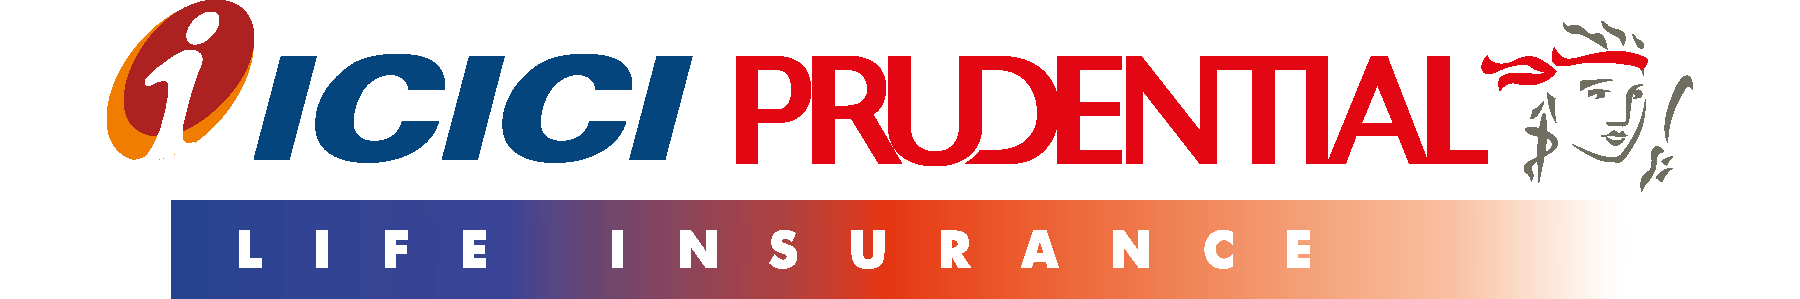 ICICI-Prudential-Life-Insurance-Logo (1).png